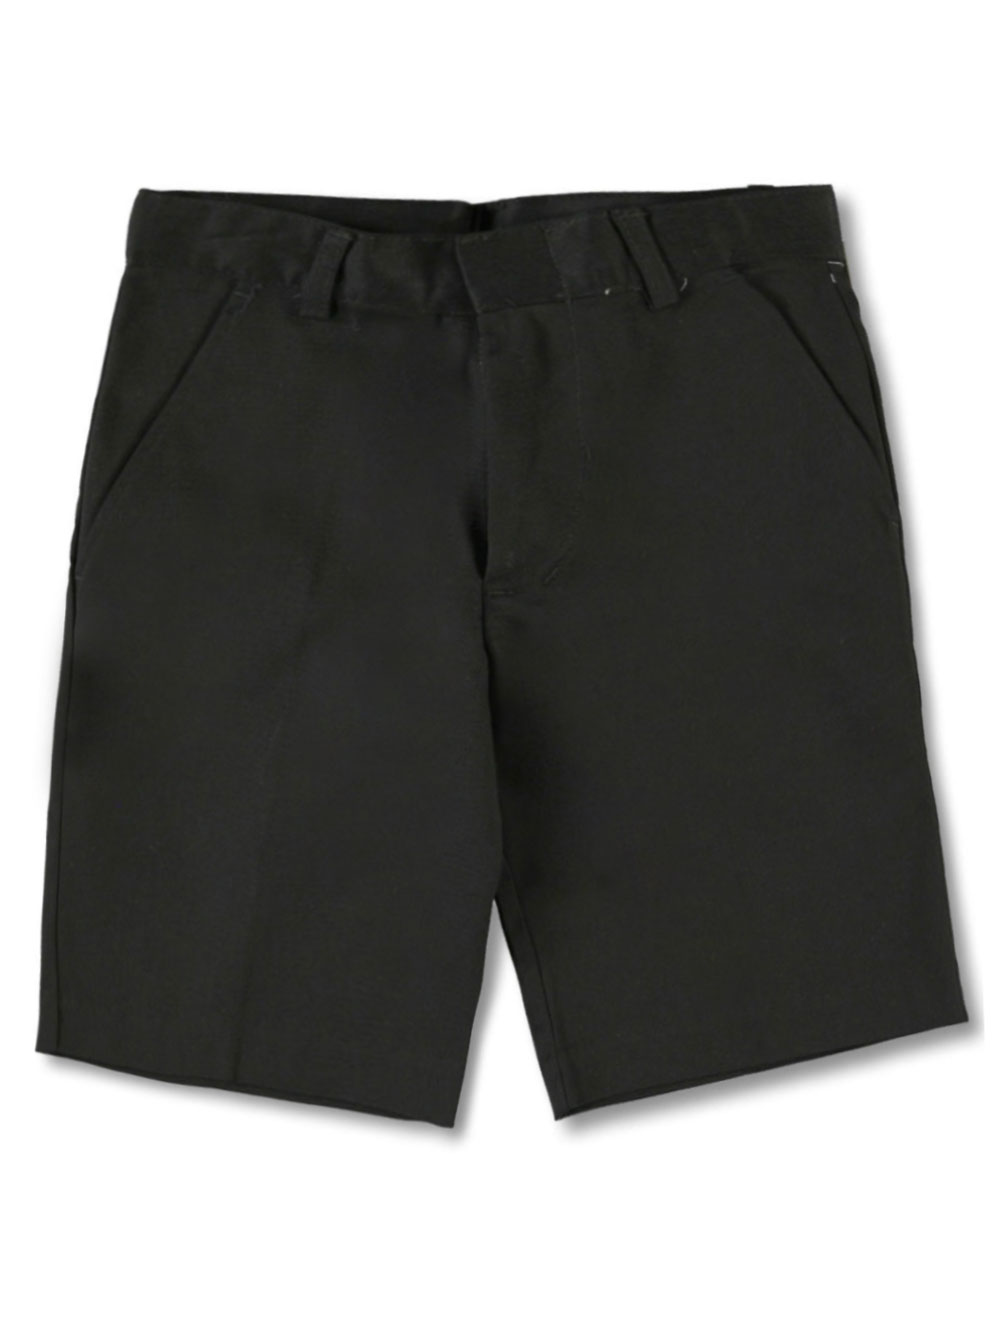 Size 18-20 Shorts for Boys